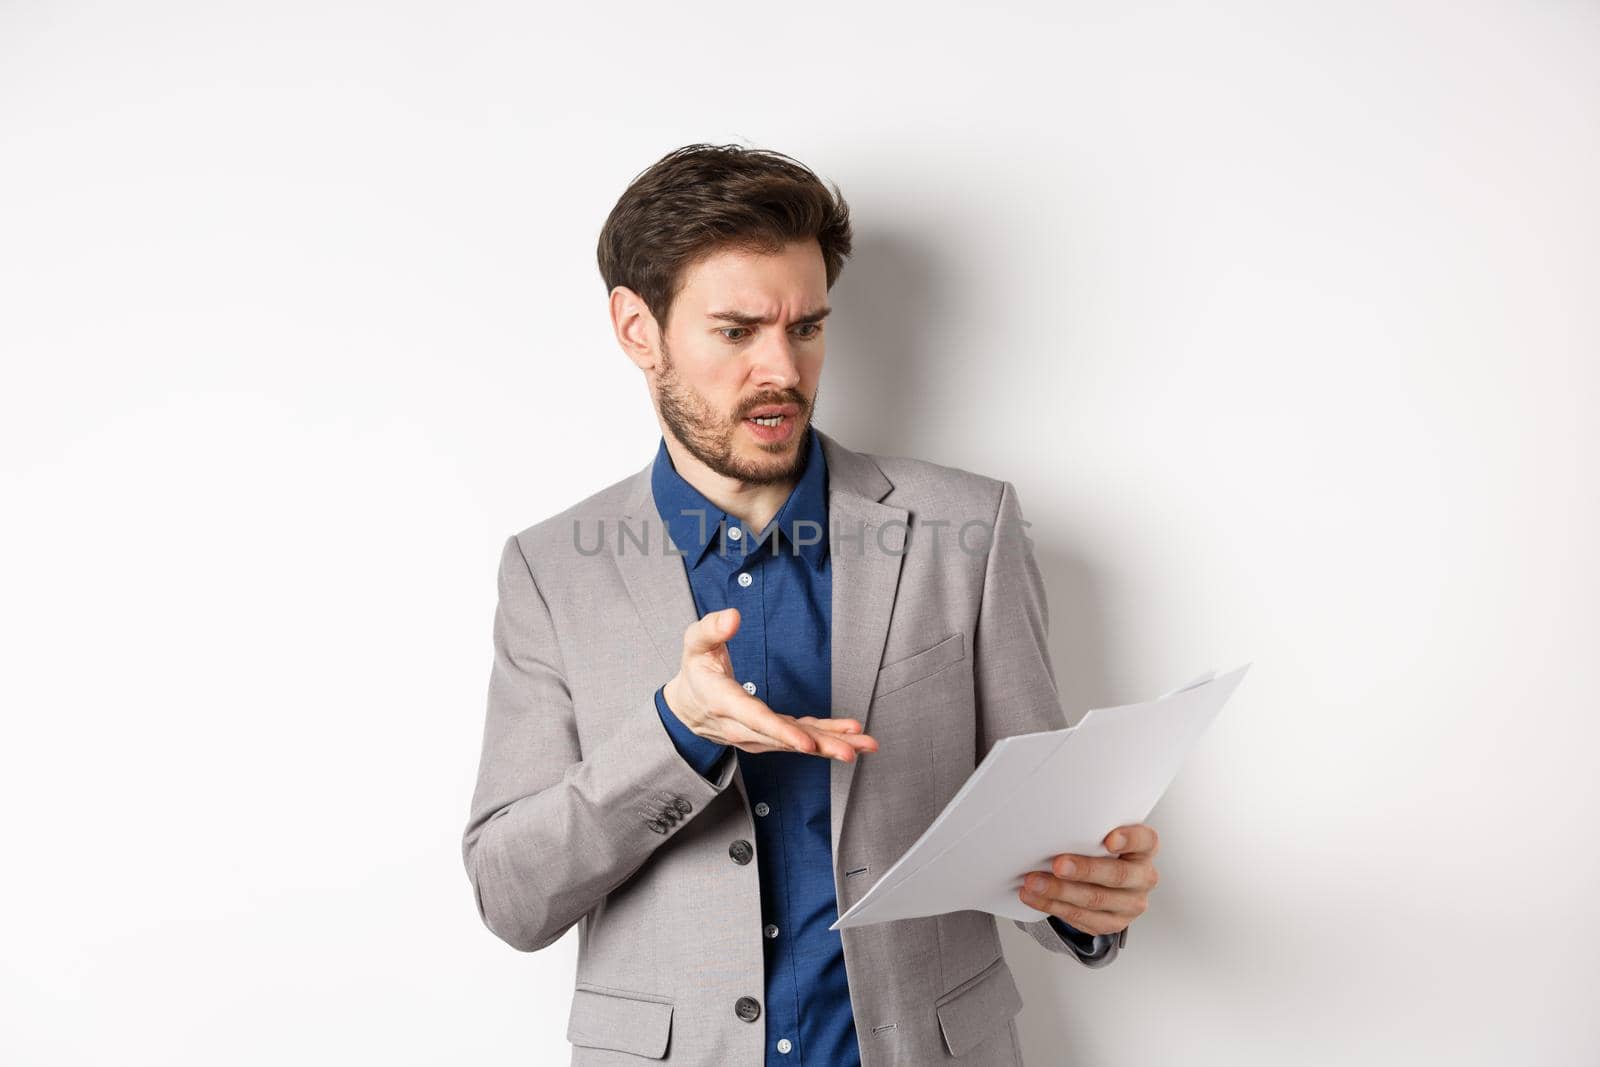 Angry employer looking at bad document, complaining on deal, pointing at paper frustrated, standing in suit on white background.